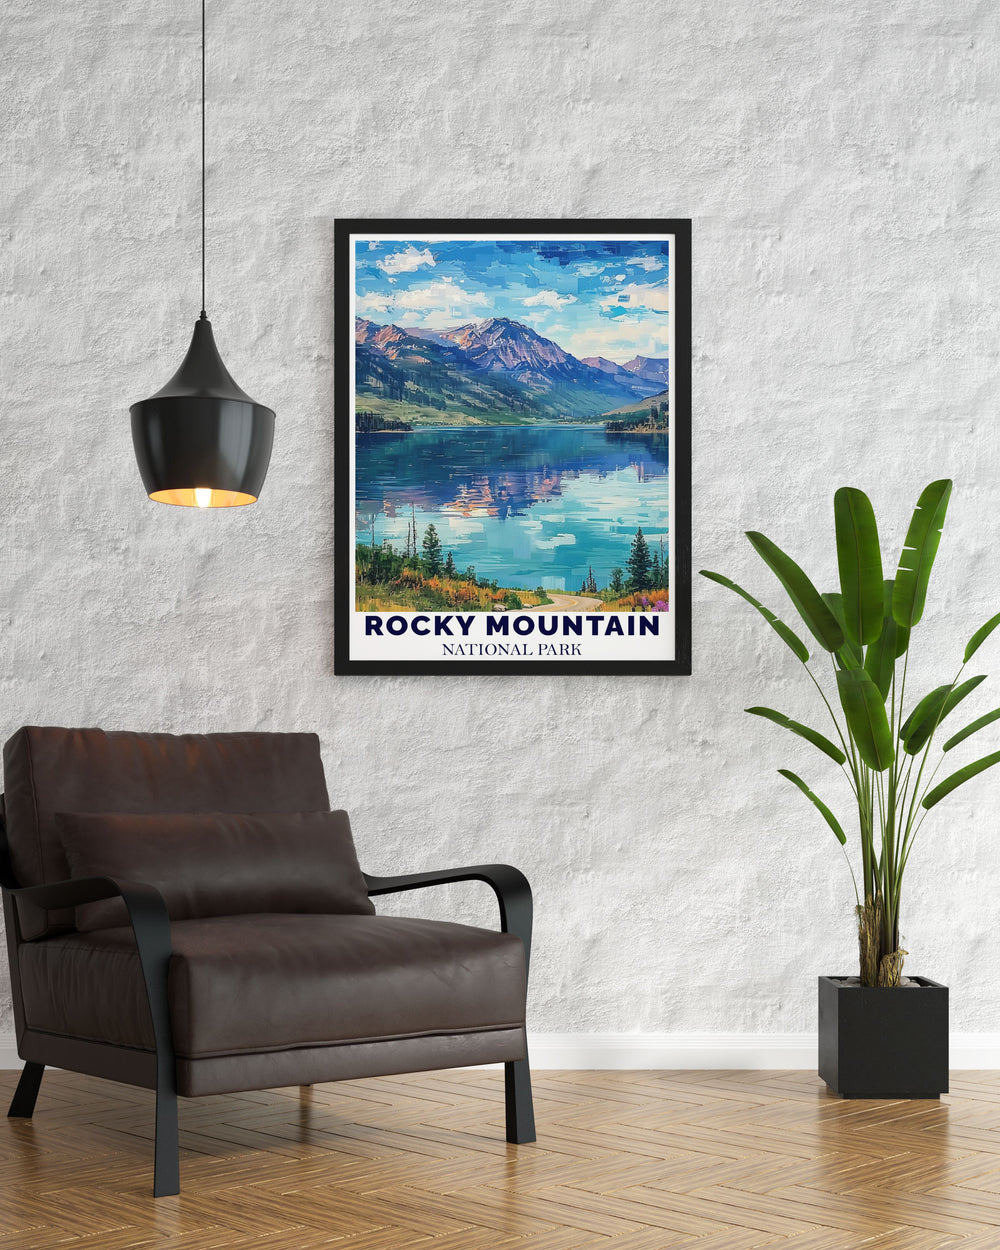 Vintage travel print of Bear Lake in the Colorado Rockies highlighting the natural beauty of the national park a great addition to any art collection or as a thoughtful gift for nature enthusiasts